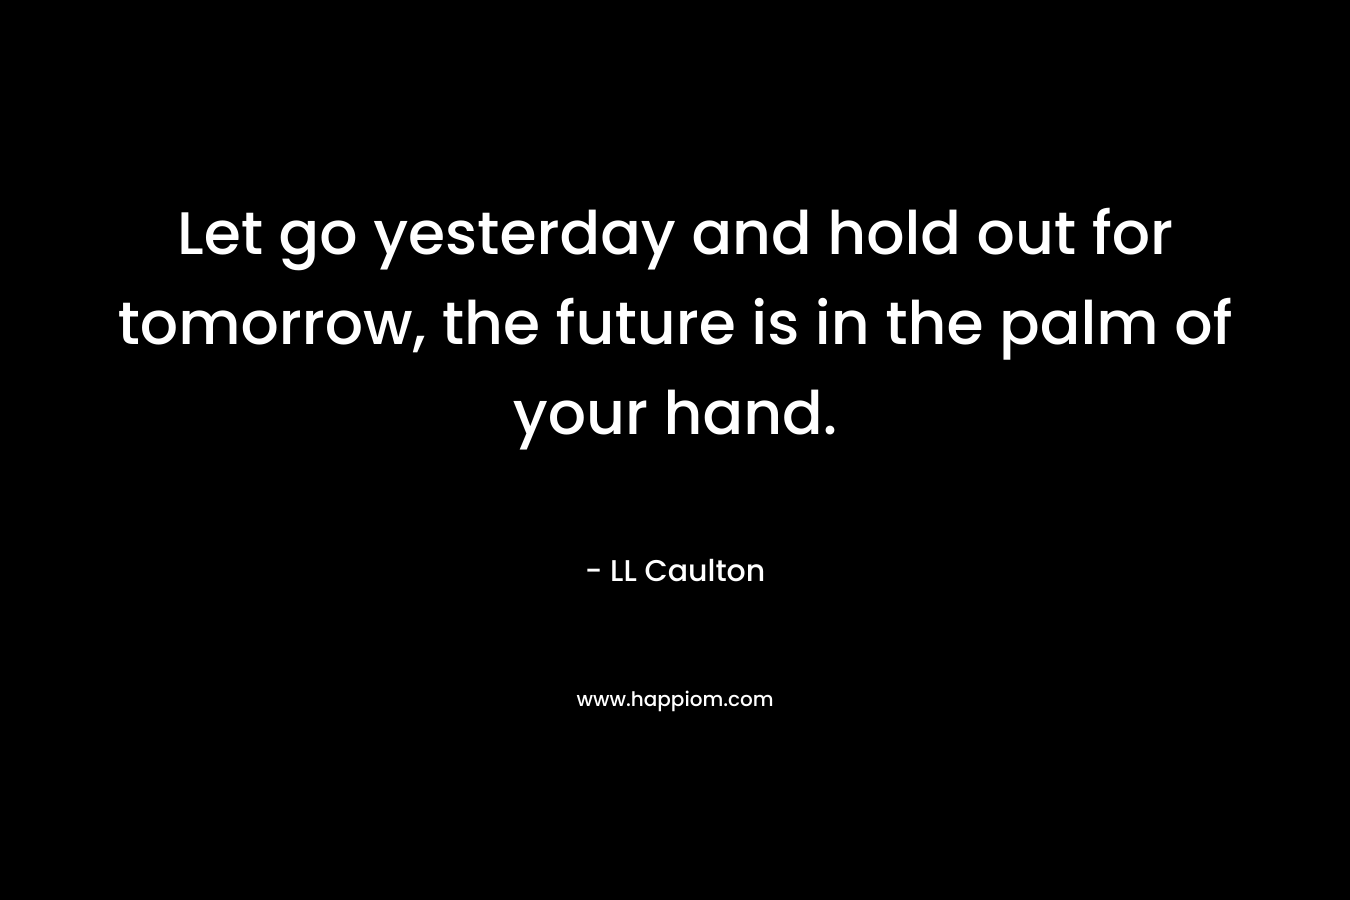 Let go yesterday and hold out for tomorrow, the future is in the palm of your hand.